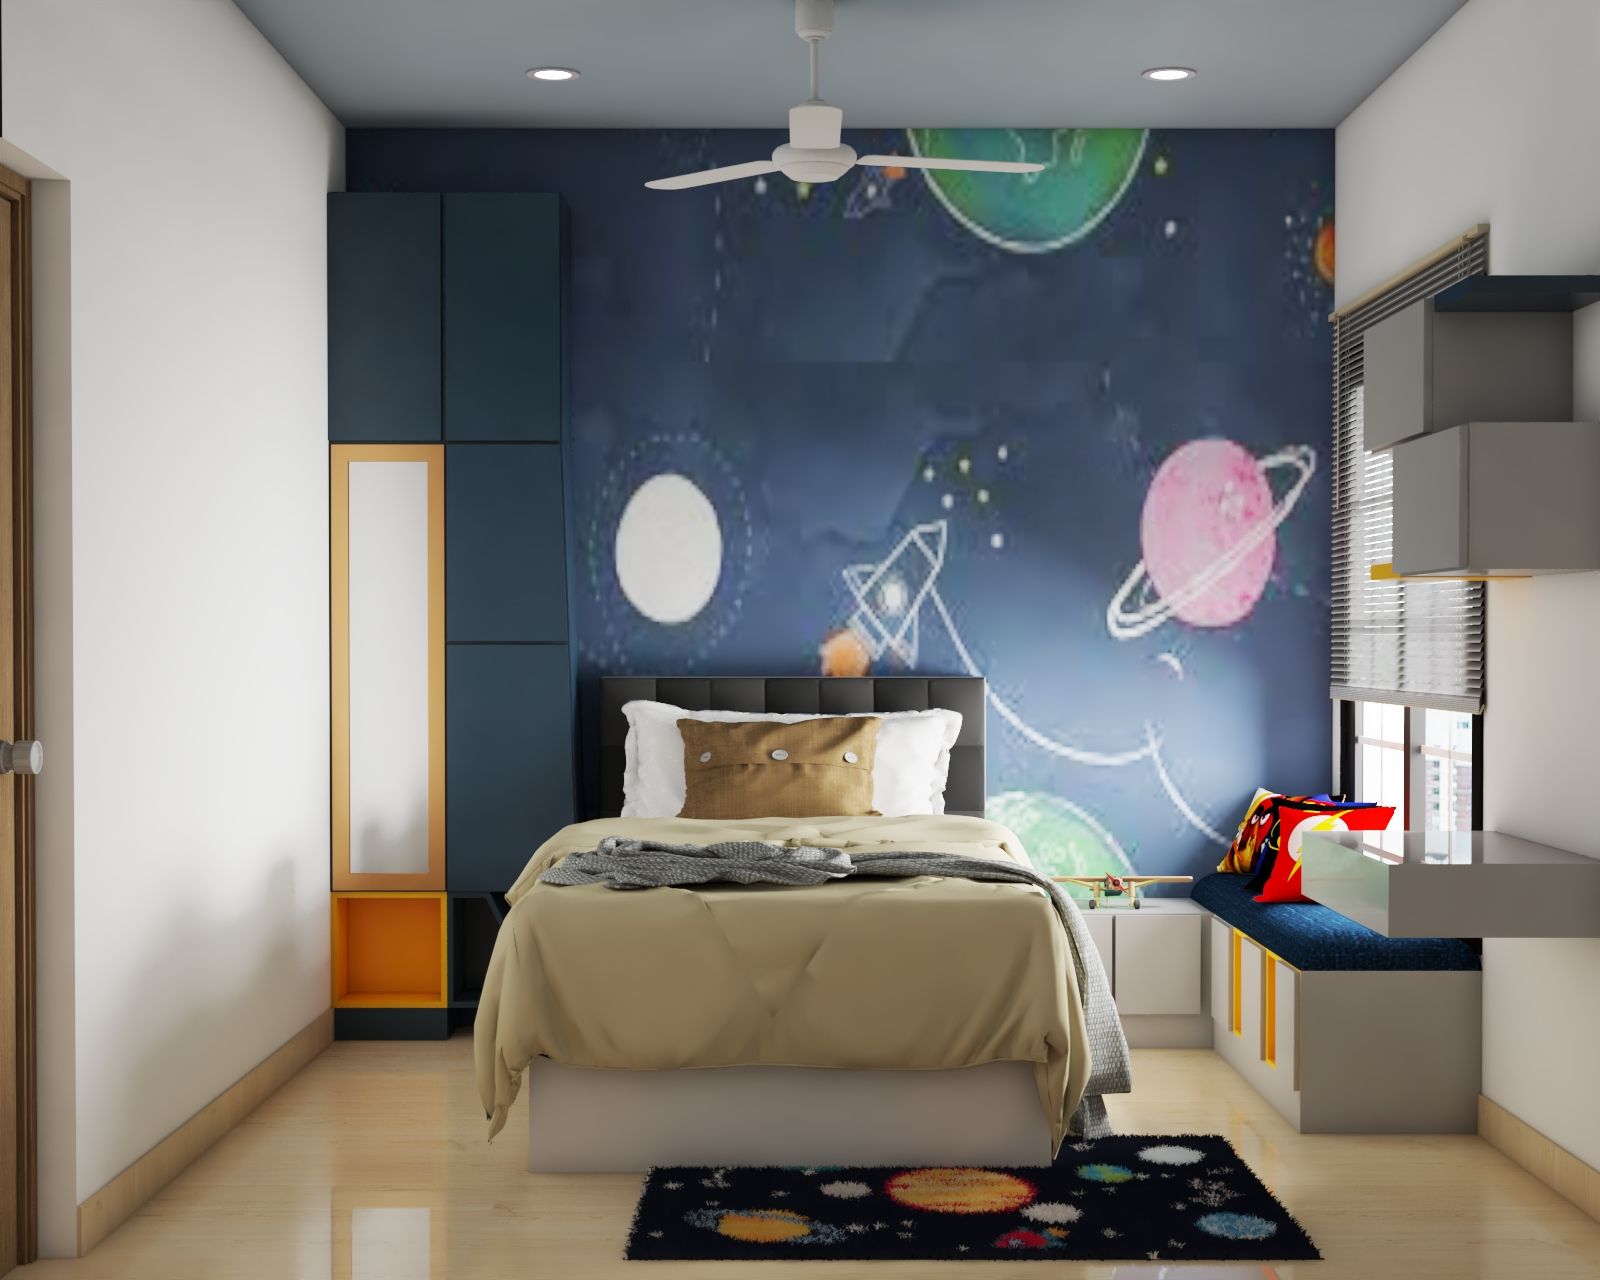 Contemporary Kid's Bedroom Design With Window Seating